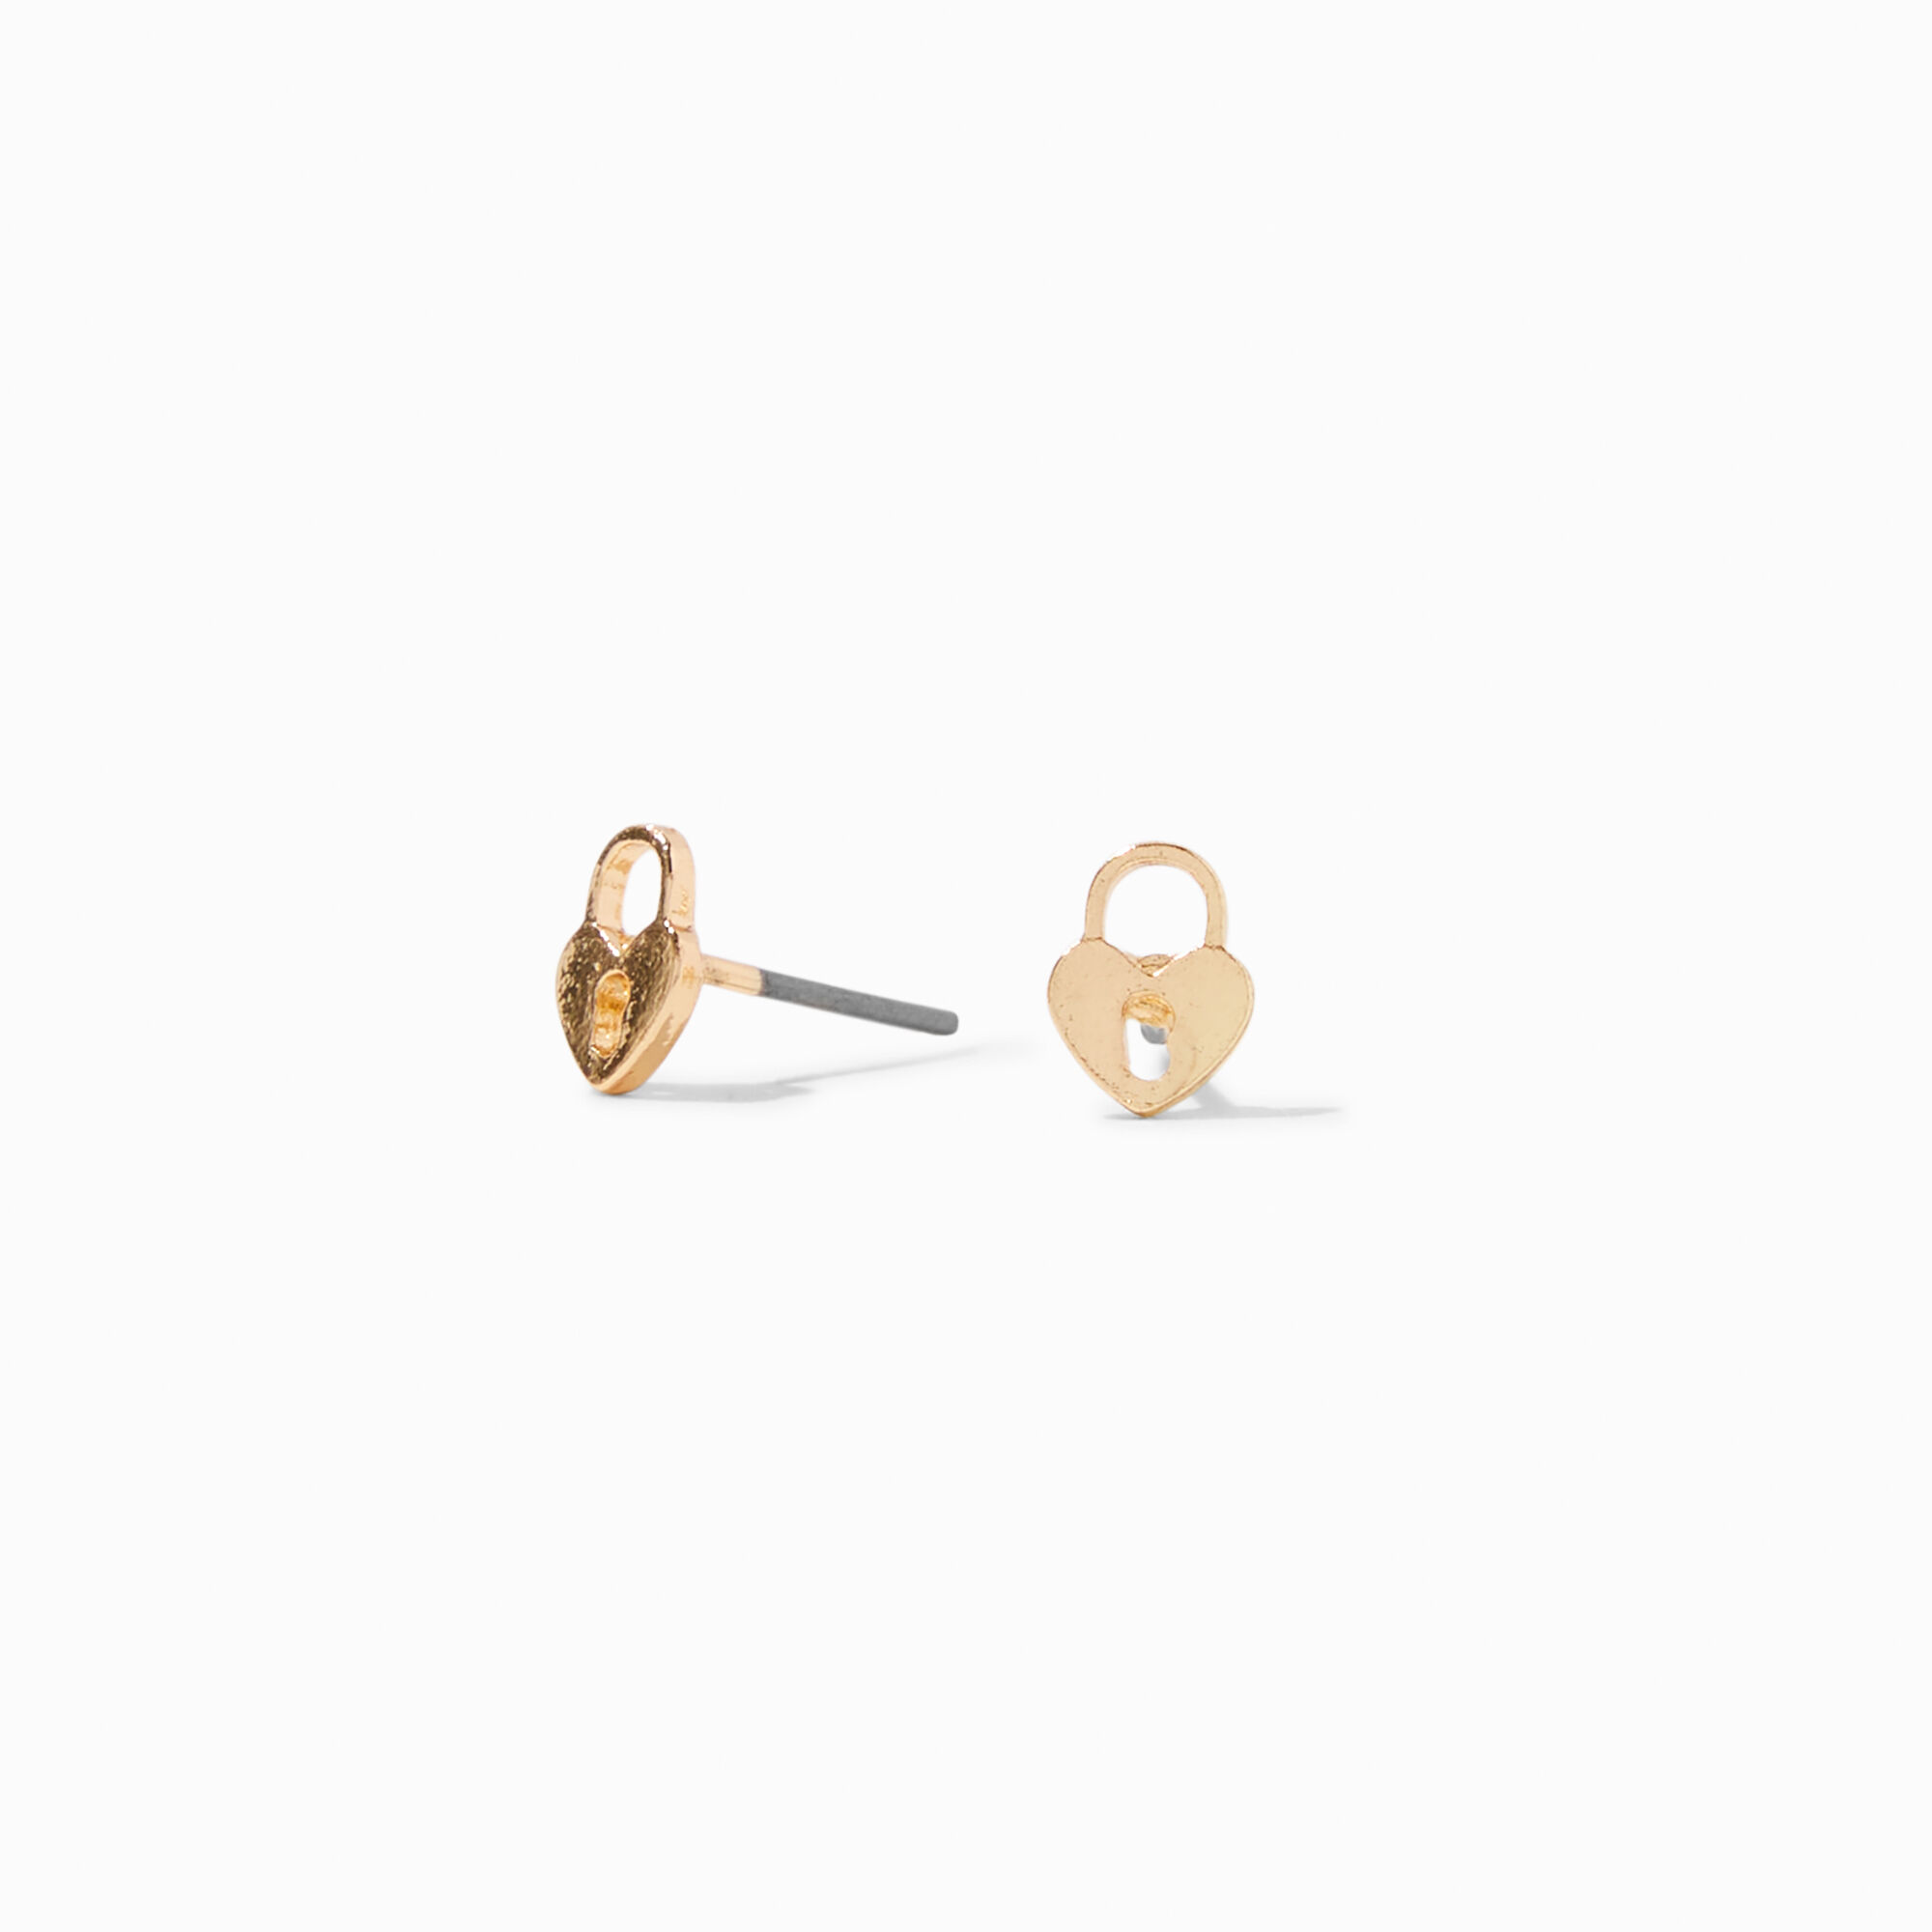 View Claires HeartShaped Lock Tone Stud Earrings Gold information